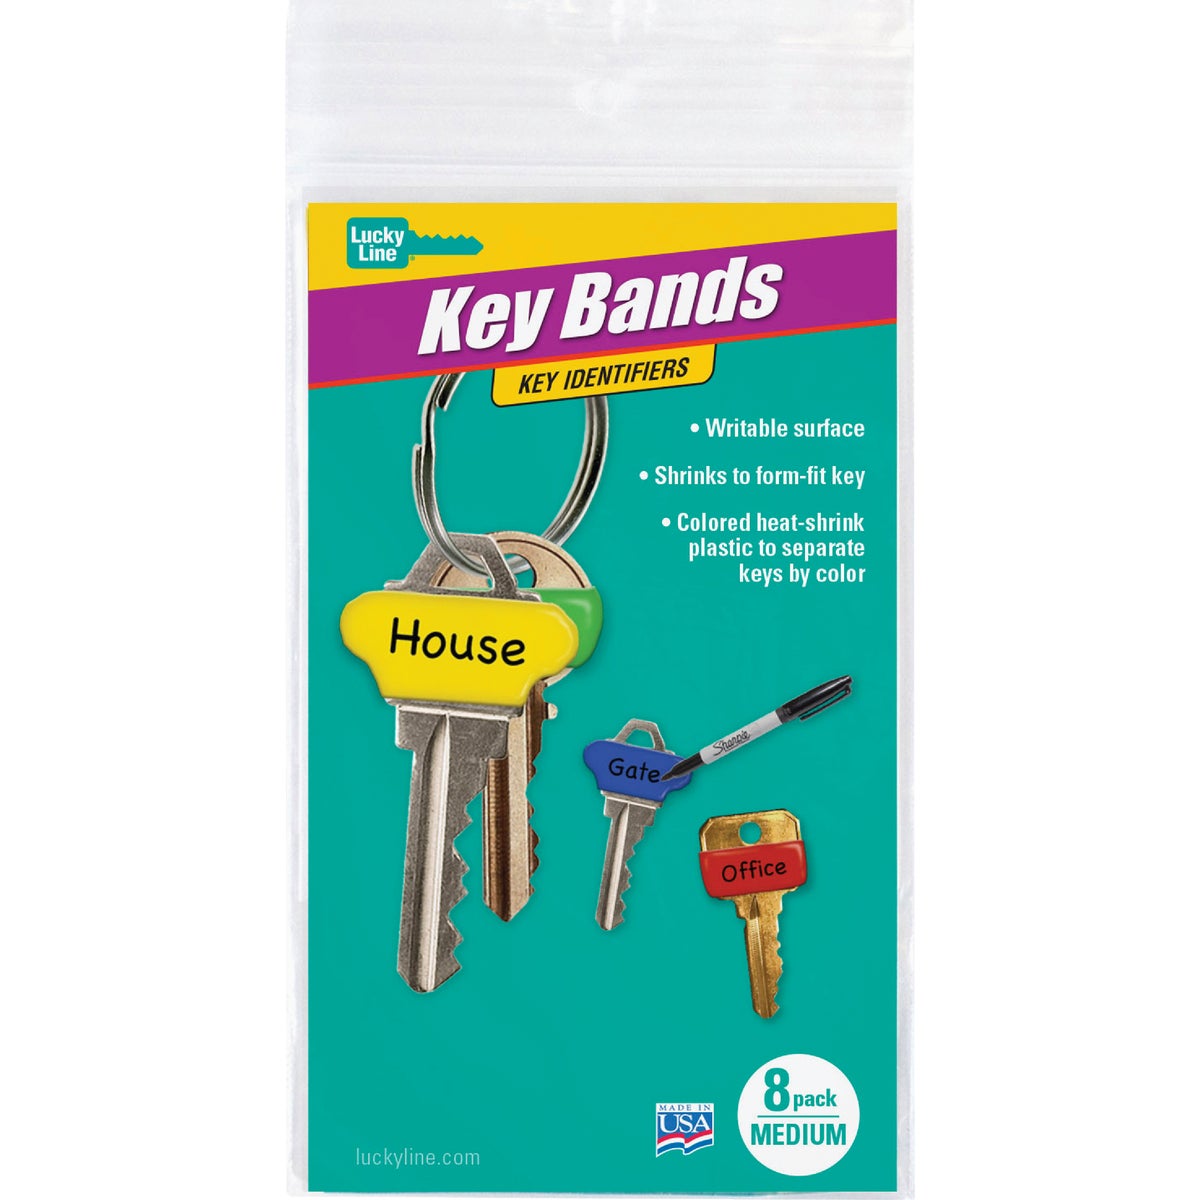 Lucky Line Write-On Key Band Identifiers (8-Pack)